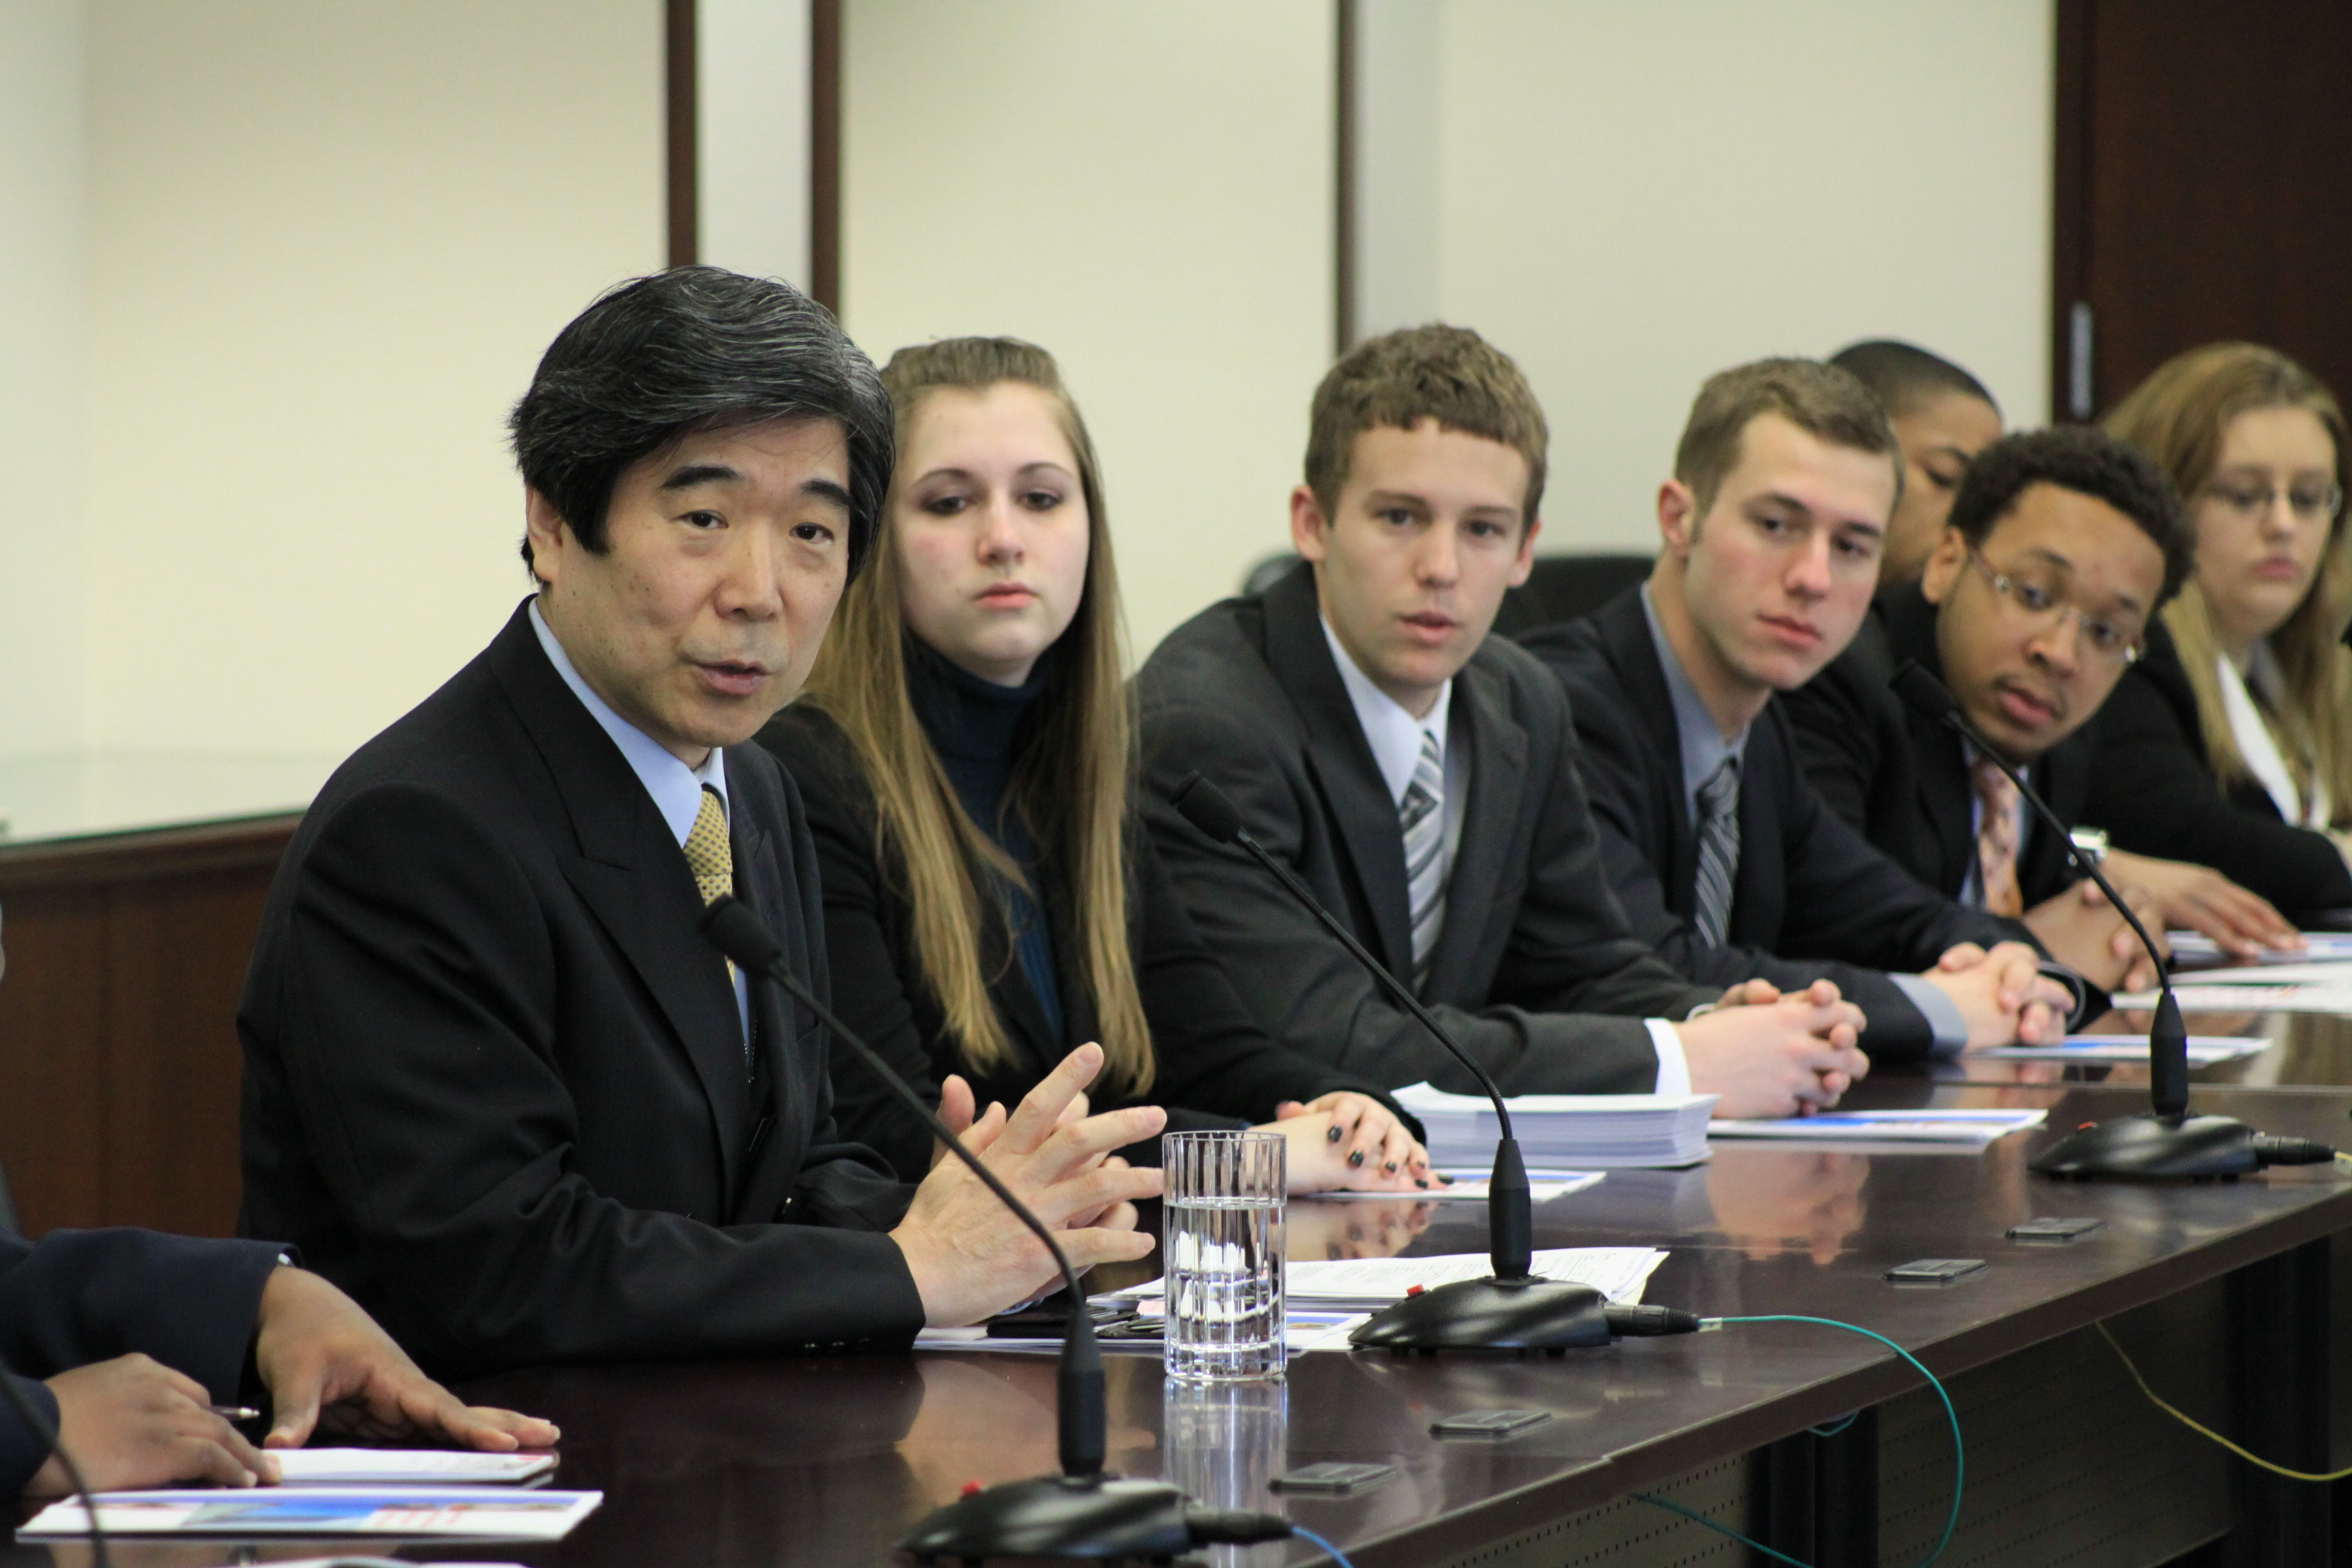 Wright State students from Model UN team sitting next to Japnese Ambasador for question and answer session